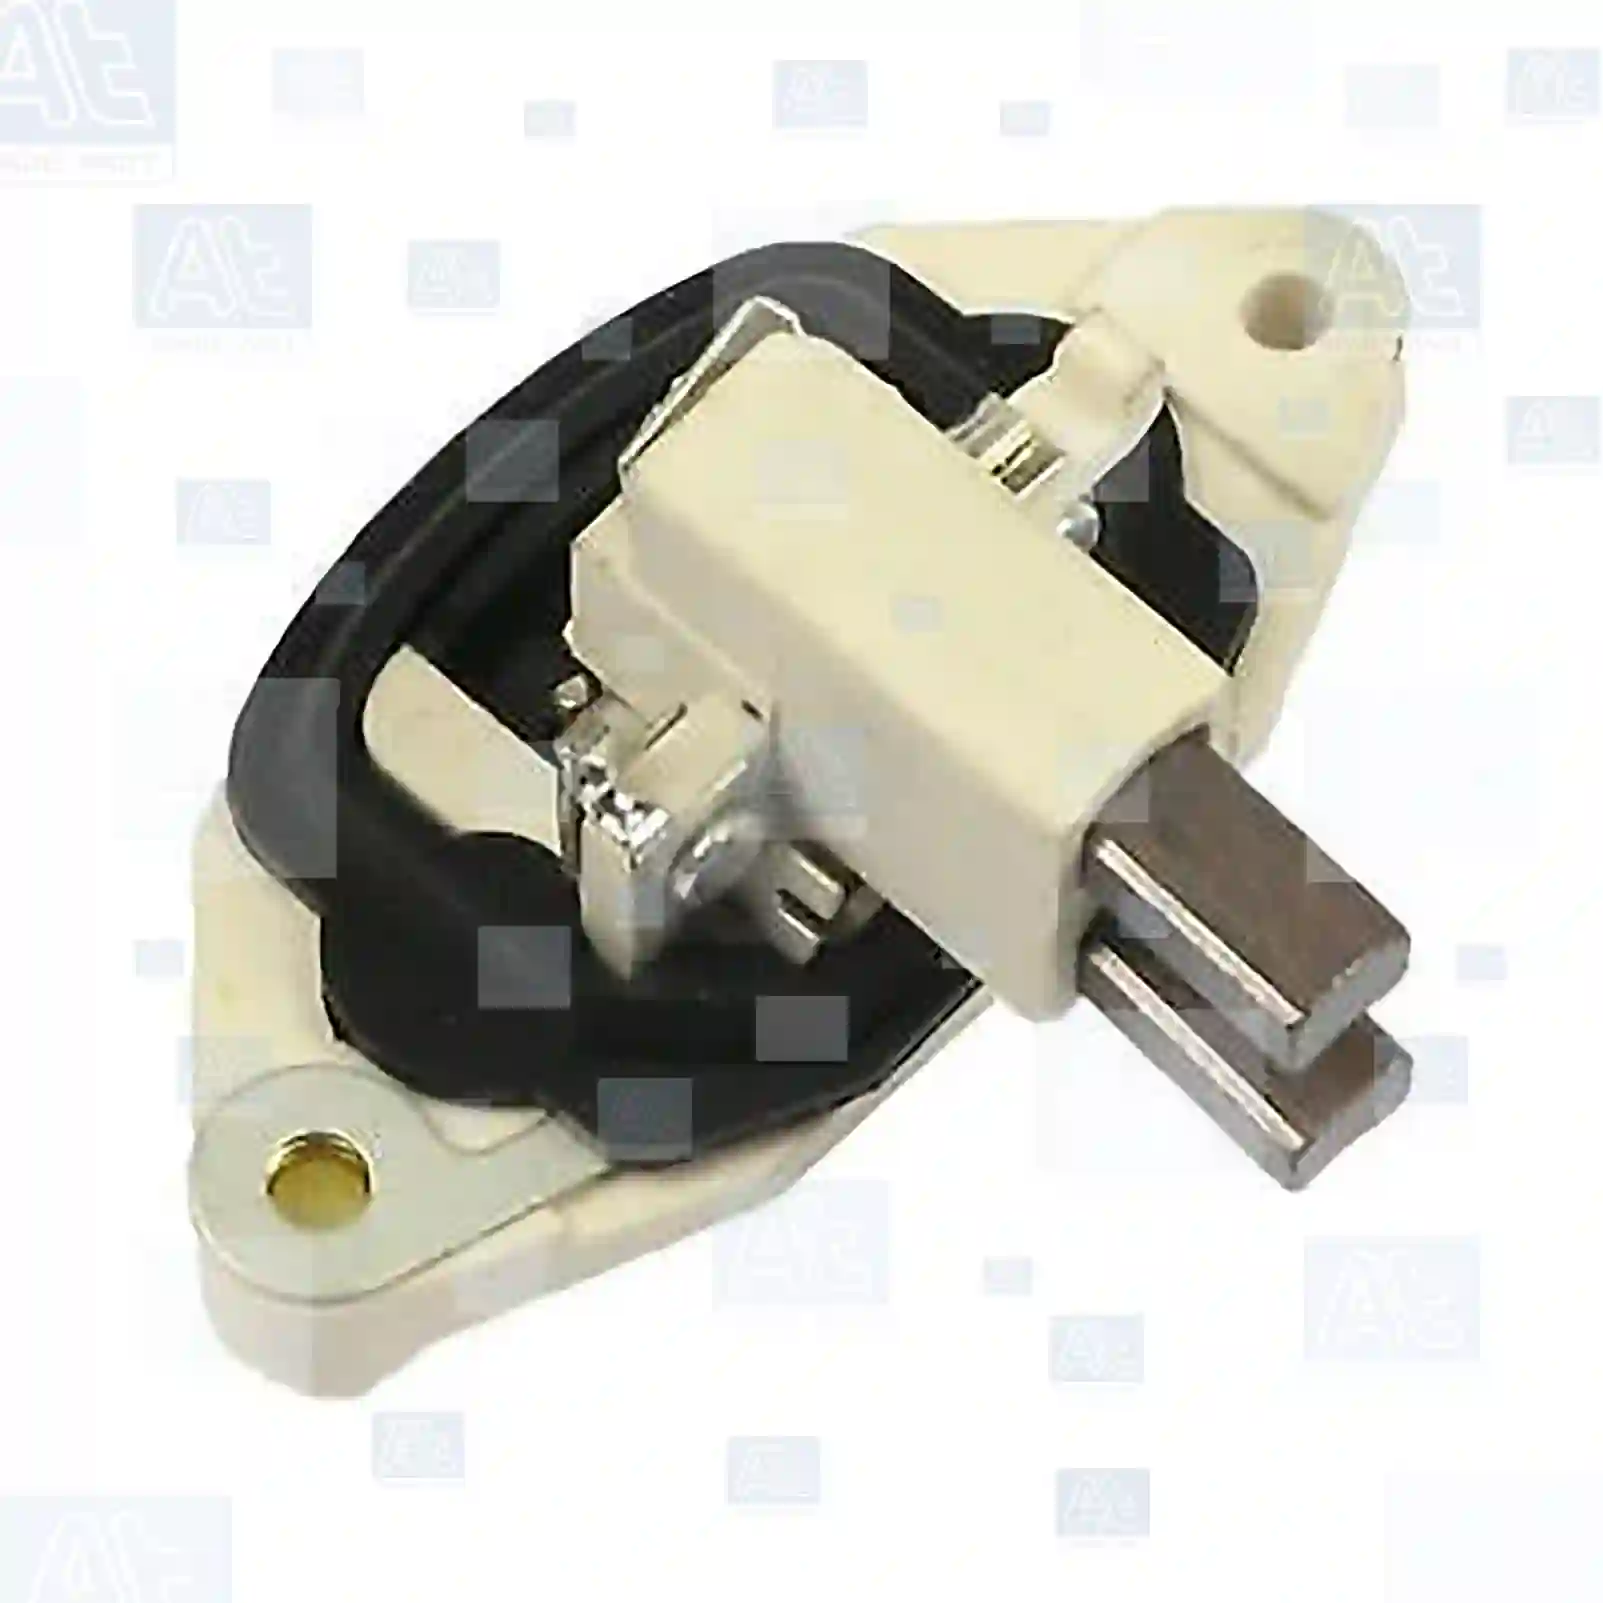 Regulator, alternator, at no 77710605, oem no: 113903801D, 2RP903803A, 79106750, E156758, 2Y-9541, 3870981, 3870982, 0068353, 0068499, 0694060, 1356286, 1356289, 1606217, 1606935, 1676162, 3239266, 371963, 68353, 68499, 68499S1, 694060, 9600908, 01171370, 01178336, 01320913, 08122152, 08125152, 08198422, 79074715, 79078923, V835362076000, 7506957, 75206957, 79078923, 8198422, 93158421, 07506957, 08198422, 75206957, 79078923, 93158421, 6094906, 6904906, 52252897, 3079392R91, 04701484, 07910675, 08122152, 08198422, 21546106, 5801221919, 75206957, 79022473, 79074715, 79078923, 8122152, 8198422, 93158421, 01171370, 01173070, 01178336, 01318299, 01320913, 08122152, 08125152, 5004185, 5603582, 560358208, 51256016005, 81256016014, 81256016016, 81256016023, 81256016024, 81256016027, 81256016031, 81256016033, 81256016035, 88256016004, K0001178336, K0001320913, 0001541905, 0001549406, 0001953438, 0021546106, 0021548406, 0021549406, 0021549906, 0031540006, 0041548702, 3451547101, 605711120010, D0641565, DO641565, 5000297997, 5001831960, 1117253, 1118188, 117253, 11995058, 1387616, 362645, 74123290050, 74213290050, 7421329006, 7421341001, 7421347002, 0001117344, 1134006, 61200090707, 61500090729, 11992579, 11995058, 1356289, 1606935, 1625880, 1698185, 21058175, 3239266, 624508, 68353, 68499, 6889019, 694060, 900908, 9600908, 043903803C, 113903801D, 2RP903803A, ZG20780-0008 At Spare Part | Engine, Accelerator Pedal, Camshaft, Connecting Rod, Crankcase, Crankshaft, Cylinder Head, Engine Suspension Mountings, Exhaust Manifold, Exhaust Gas Recirculation, Filter Kits, Flywheel Housing, General Overhaul Kits, Engine, Intake Manifold, Oil Cleaner, Oil Cooler, Oil Filter, Oil Pump, Oil Sump, Piston & Liner, Sensor & Switch, Timing Case, Turbocharger, Cooling System, Belt Tensioner, Coolant Filter, Coolant Pipe, Corrosion Prevention Agent, Drive, Expansion Tank, Fan, Intercooler, Monitors & Gauges, Radiator, Thermostat, V-Belt / Timing belt, Water Pump, Fuel System, Electronical Injector Unit, Feed Pump, Fuel Filter, cpl., Fuel Gauge Sender,  Fuel Line, Fuel Pump, Fuel Tank, Injection Line Kit, Injection Pump, Exhaust System, Clutch & Pedal, Gearbox, Propeller Shaft, Axles, Brake System, Hubs & Wheels, Suspension, Leaf Spring, Universal Parts / Accessories, Steering, Electrical System, Cabin Regulator, alternator, at no 77710605, oem no: 113903801D, 2RP903803A, 79106750, E156758, 2Y-9541, 3870981, 3870982, 0068353, 0068499, 0694060, 1356286, 1356289, 1606217, 1606935, 1676162, 3239266, 371963, 68353, 68499, 68499S1, 694060, 9600908, 01171370, 01178336, 01320913, 08122152, 08125152, 08198422, 79074715, 79078923, V835362076000, 7506957, 75206957, 79078923, 8198422, 93158421, 07506957, 08198422, 75206957, 79078923, 93158421, 6094906, 6904906, 52252897, 3079392R91, 04701484, 07910675, 08122152, 08198422, 21546106, 5801221919, 75206957, 79022473, 79074715, 79078923, 8122152, 8198422, 93158421, 01171370, 01173070, 01178336, 01318299, 01320913, 08122152, 08125152, 5004185, 5603582, 560358208, 51256016005, 81256016014, 81256016016, 81256016023, 81256016024, 81256016027, 81256016031, 81256016033, 81256016035, 88256016004, K0001178336, K0001320913, 0001541905, 0001549406, 0001953438, 0021546106, 0021548406, 0021549406, 0021549906, 0031540006, 0041548702, 3451547101, 605711120010, D0641565, DO641565, 5000297997, 5001831960, 1117253, 1118188, 117253, 11995058, 1387616, 362645, 74123290050, 74213290050, 7421329006, 7421341001, 7421347002, 0001117344, 1134006, 61200090707, 61500090729, 11992579, 11995058, 1356289, 1606935, 1625880, 1698185, 21058175, 3239266, 624508, 68353, 68499, 6889019, 694060, 900908, 9600908, 043903803C, 113903801D, 2RP903803A, ZG20780-0008 At Spare Part | Engine, Accelerator Pedal, Camshaft, Connecting Rod, Crankcase, Crankshaft, Cylinder Head, Engine Suspension Mountings, Exhaust Manifold, Exhaust Gas Recirculation, Filter Kits, Flywheel Housing, General Overhaul Kits, Engine, Intake Manifold, Oil Cleaner, Oil Cooler, Oil Filter, Oil Pump, Oil Sump, Piston & Liner, Sensor & Switch, Timing Case, Turbocharger, Cooling System, Belt Tensioner, Coolant Filter, Coolant Pipe, Corrosion Prevention Agent, Drive, Expansion Tank, Fan, Intercooler, Monitors & Gauges, Radiator, Thermostat, V-Belt / Timing belt, Water Pump, Fuel System, Electronical Injector Unit, Feed Pump, Fuel Filter, cpl., Fuel Gauge Sender,  Fuel Line, Fuel Pump, Fuel Tank, Injection Line Kit, Injection Pump, Exhaust System, Clutch & Pedal, Gearbox, Propeller Shaft, Axles, Brake System, Hubs & Wheels, Suspension, Leaf Spring, Universal Parts / Accessories, Steering, Electrical System, Cabin